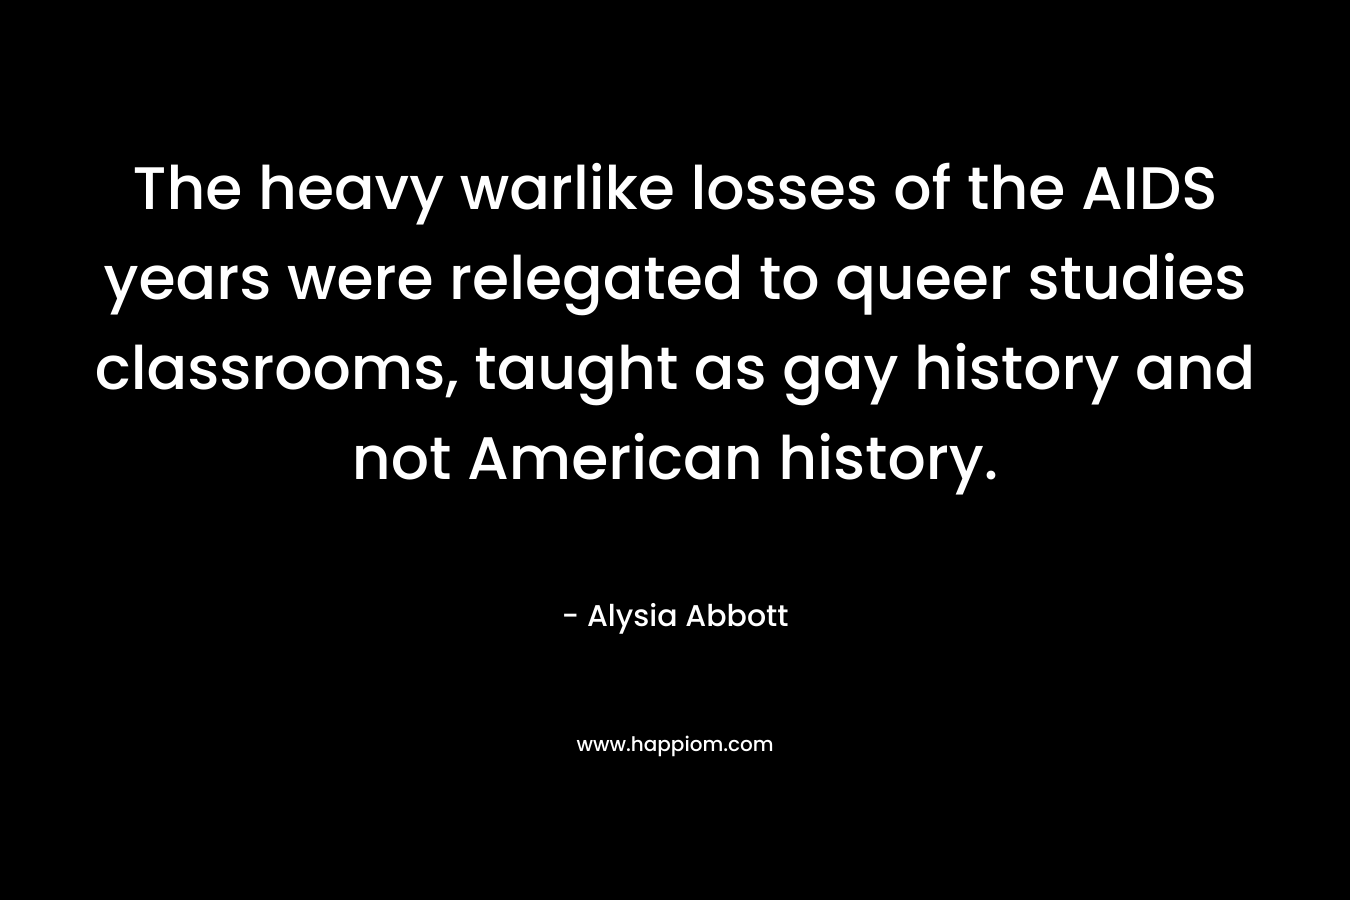 The heavy warlike losses of the AIDS years were relegated to queer studies classrooms, taught as gay history and not American history. – Alysia Abbott